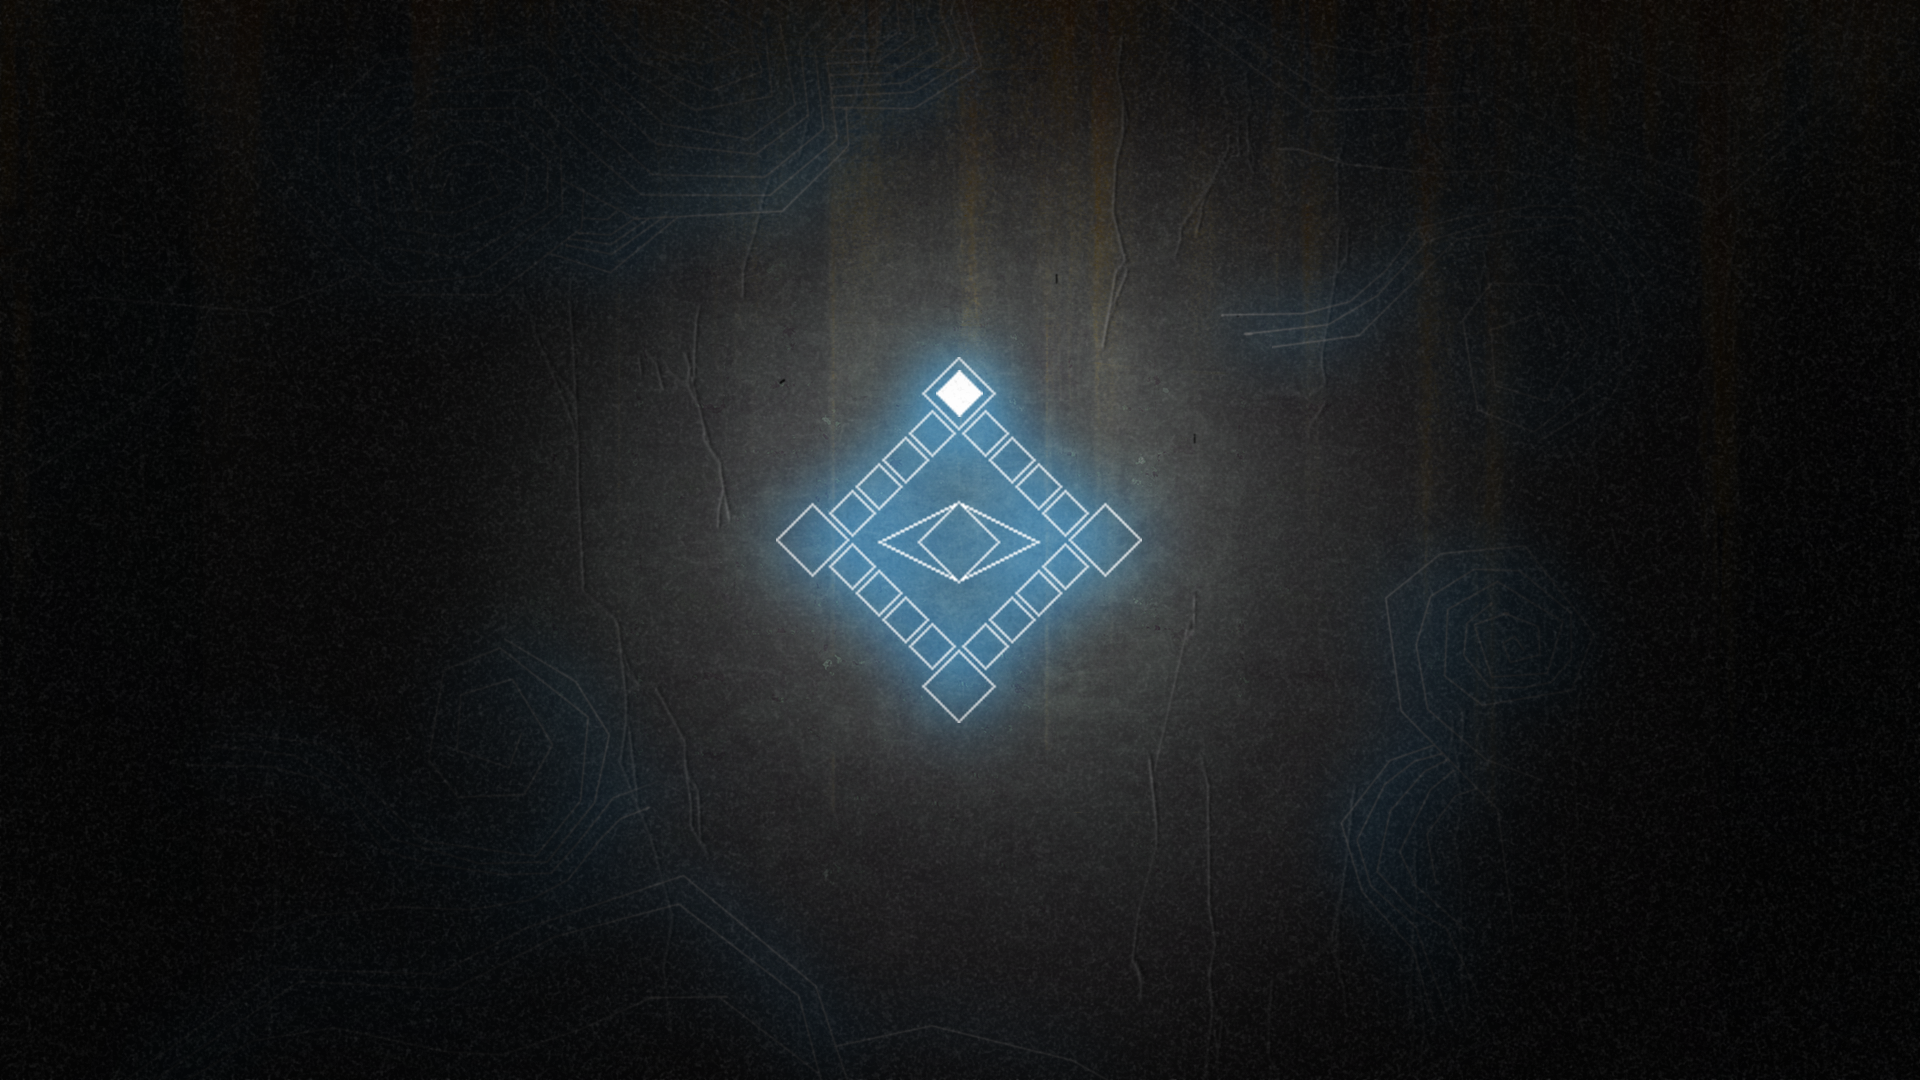 Icon for First Light